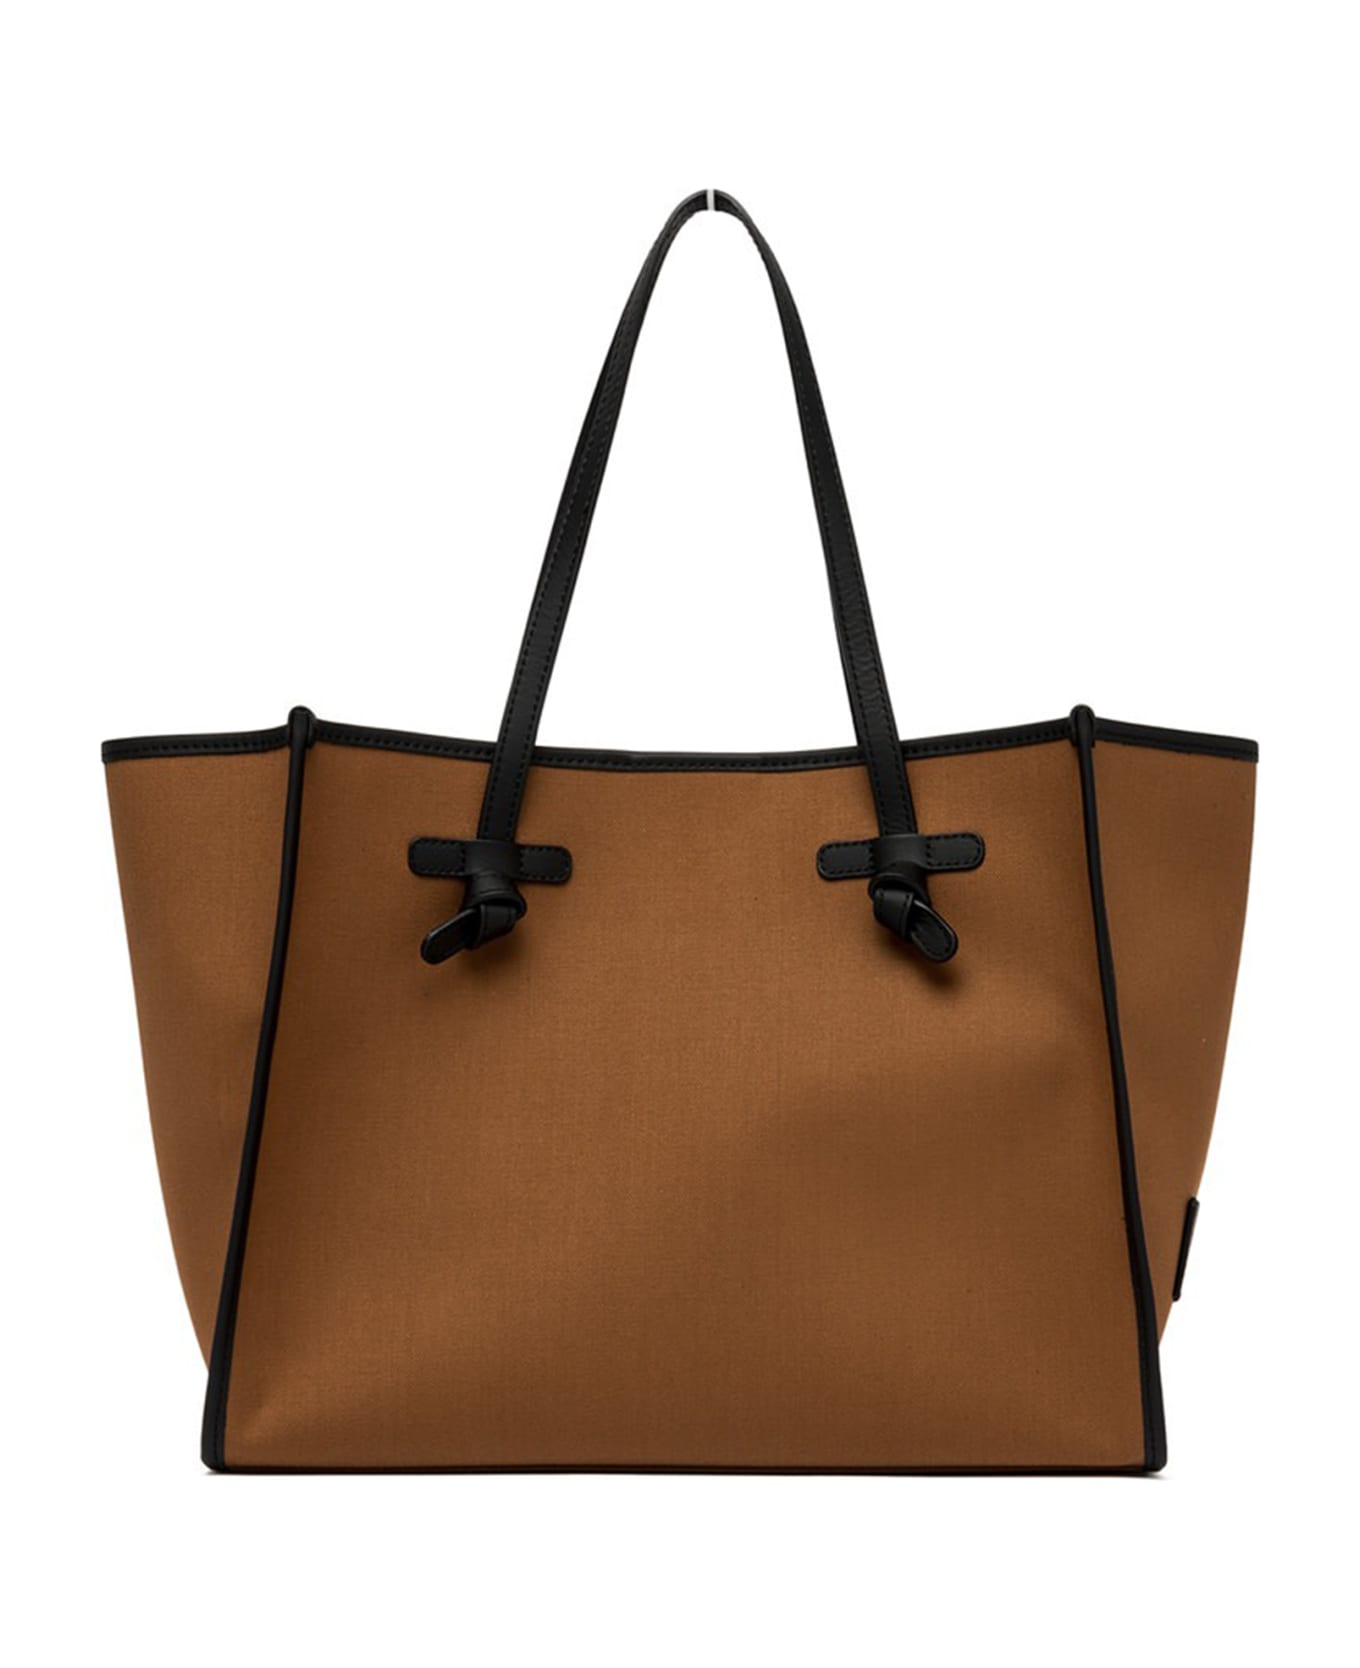 Gianni Chiarini Marcella Shopping Bag In Canvas And Leather Profiles - CUOIO-LILAC トートバッグ